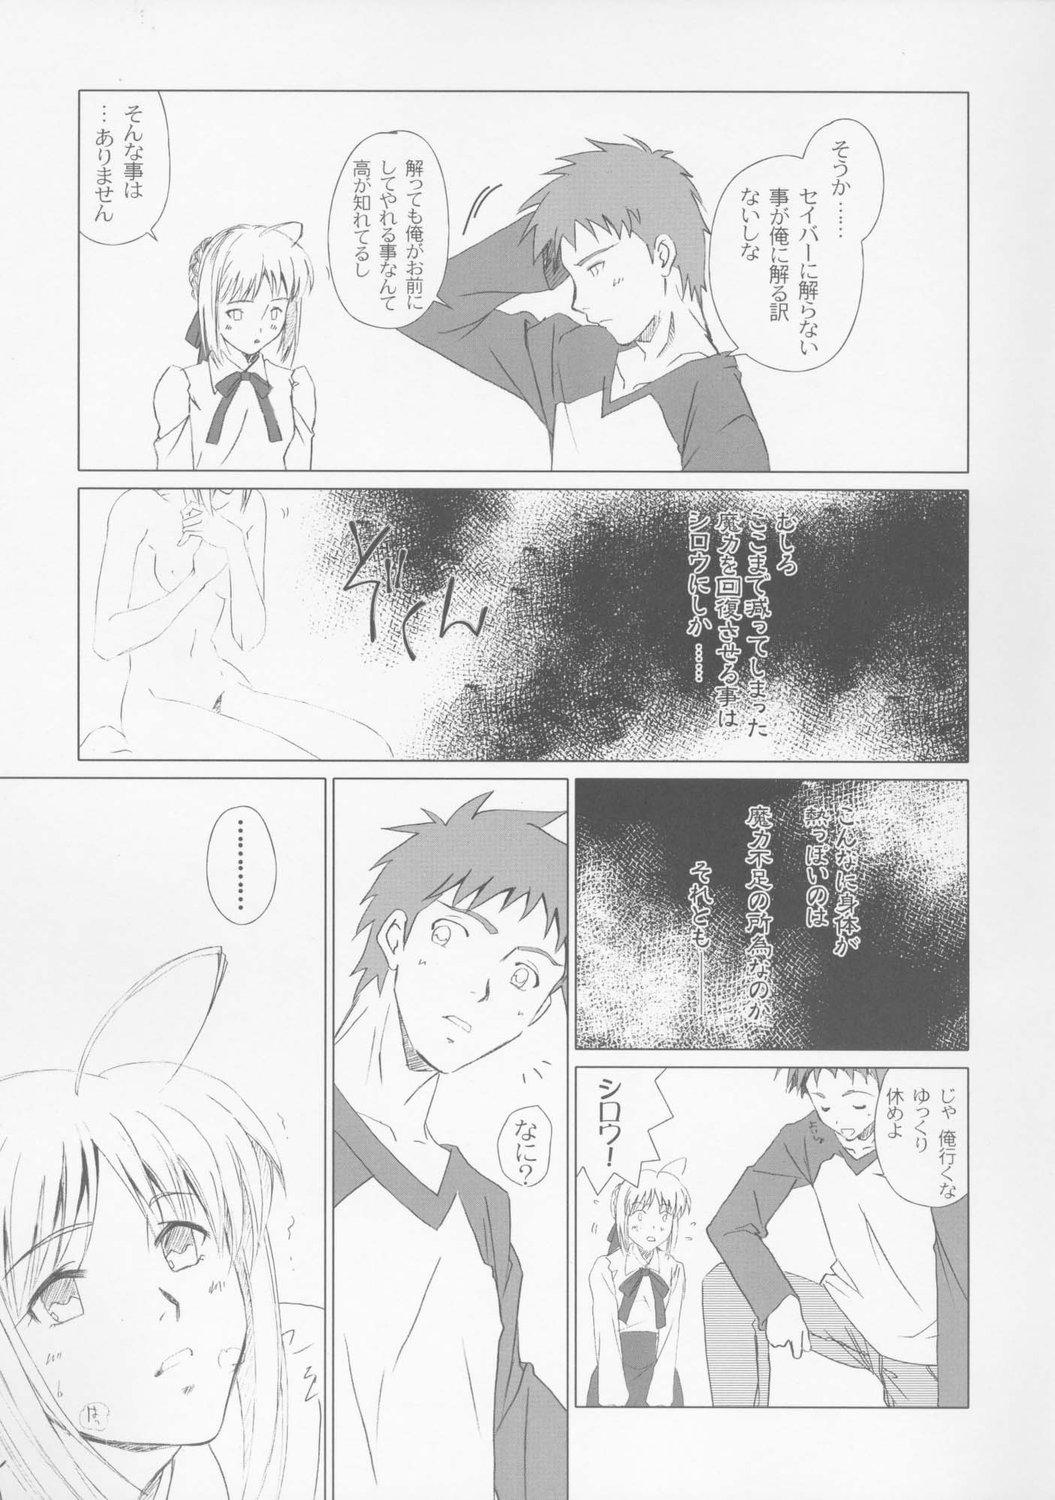 Roundass Eien no Uta - Ever Song - Fate stay night Fate hollow ataraxia Ball Busting - Page 11